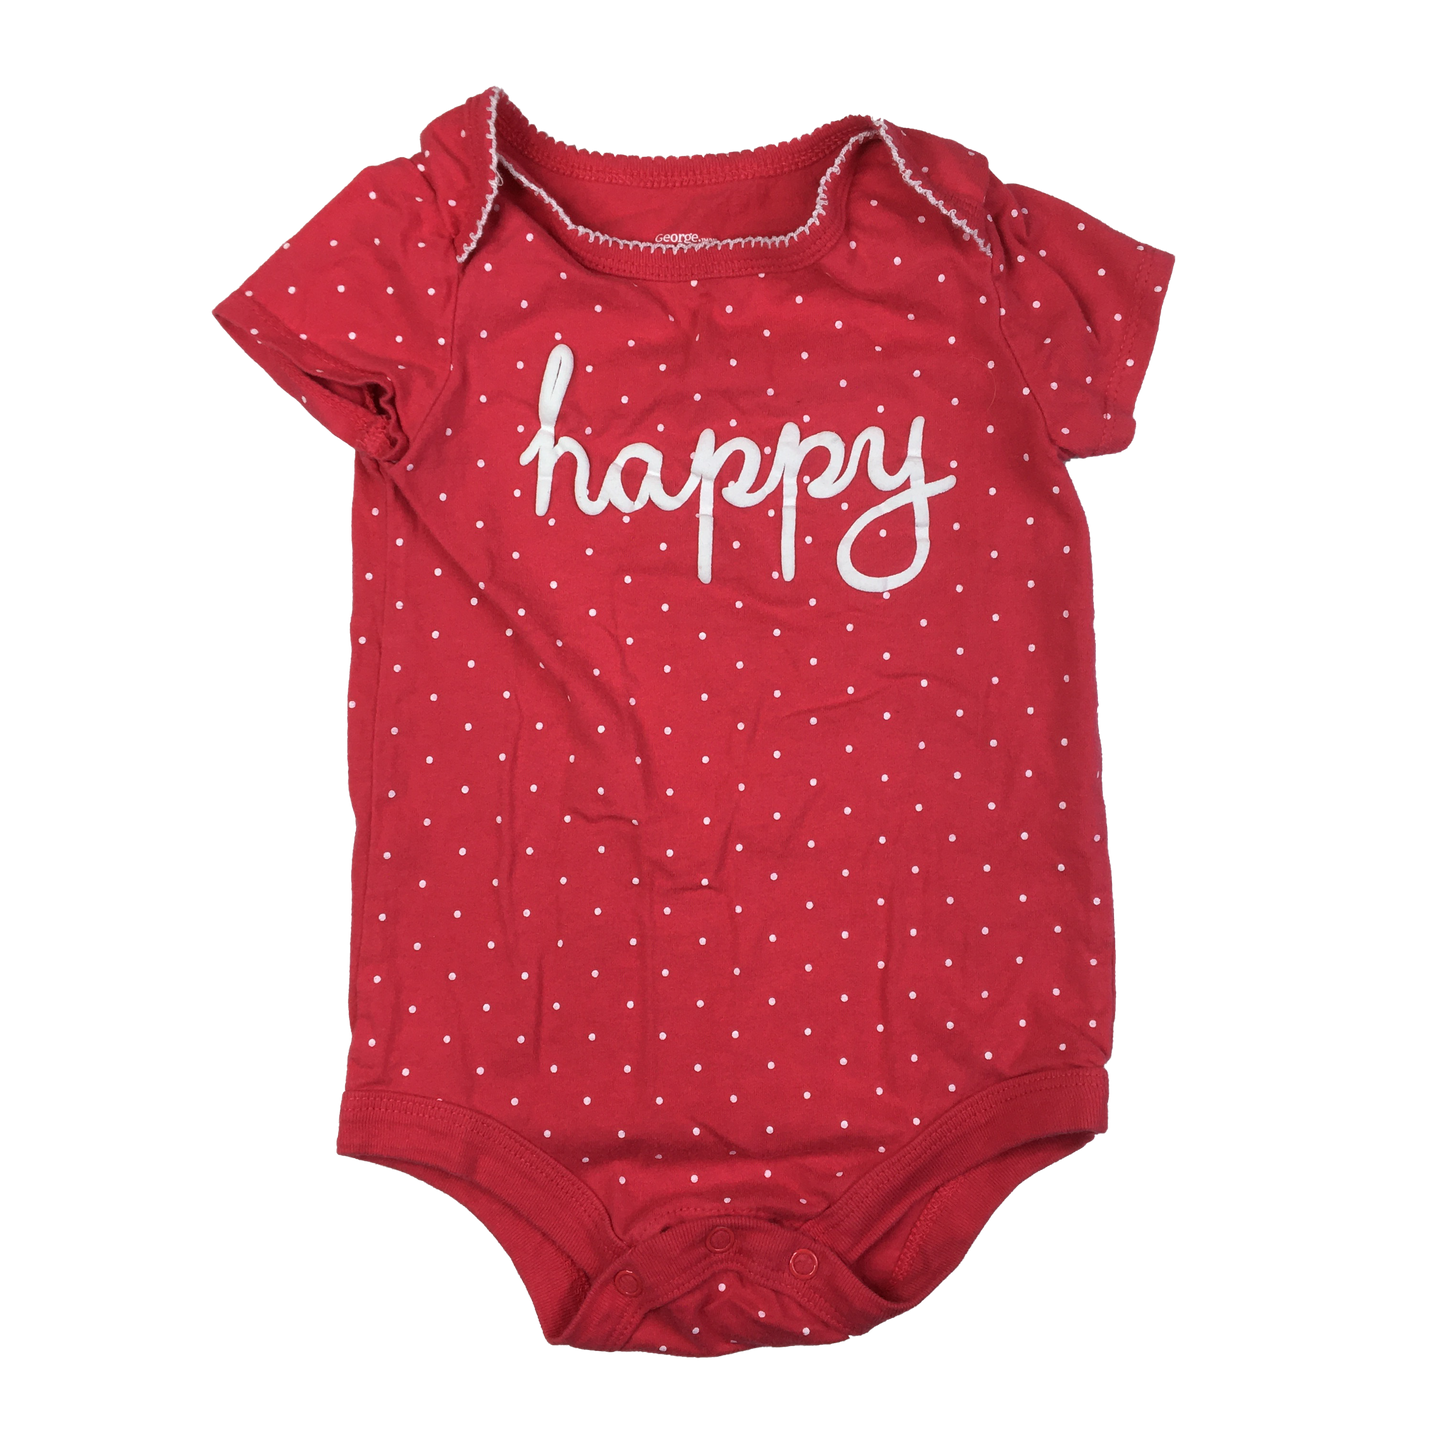 George Pink Onesie with "Happy" Embroidery 12-18M